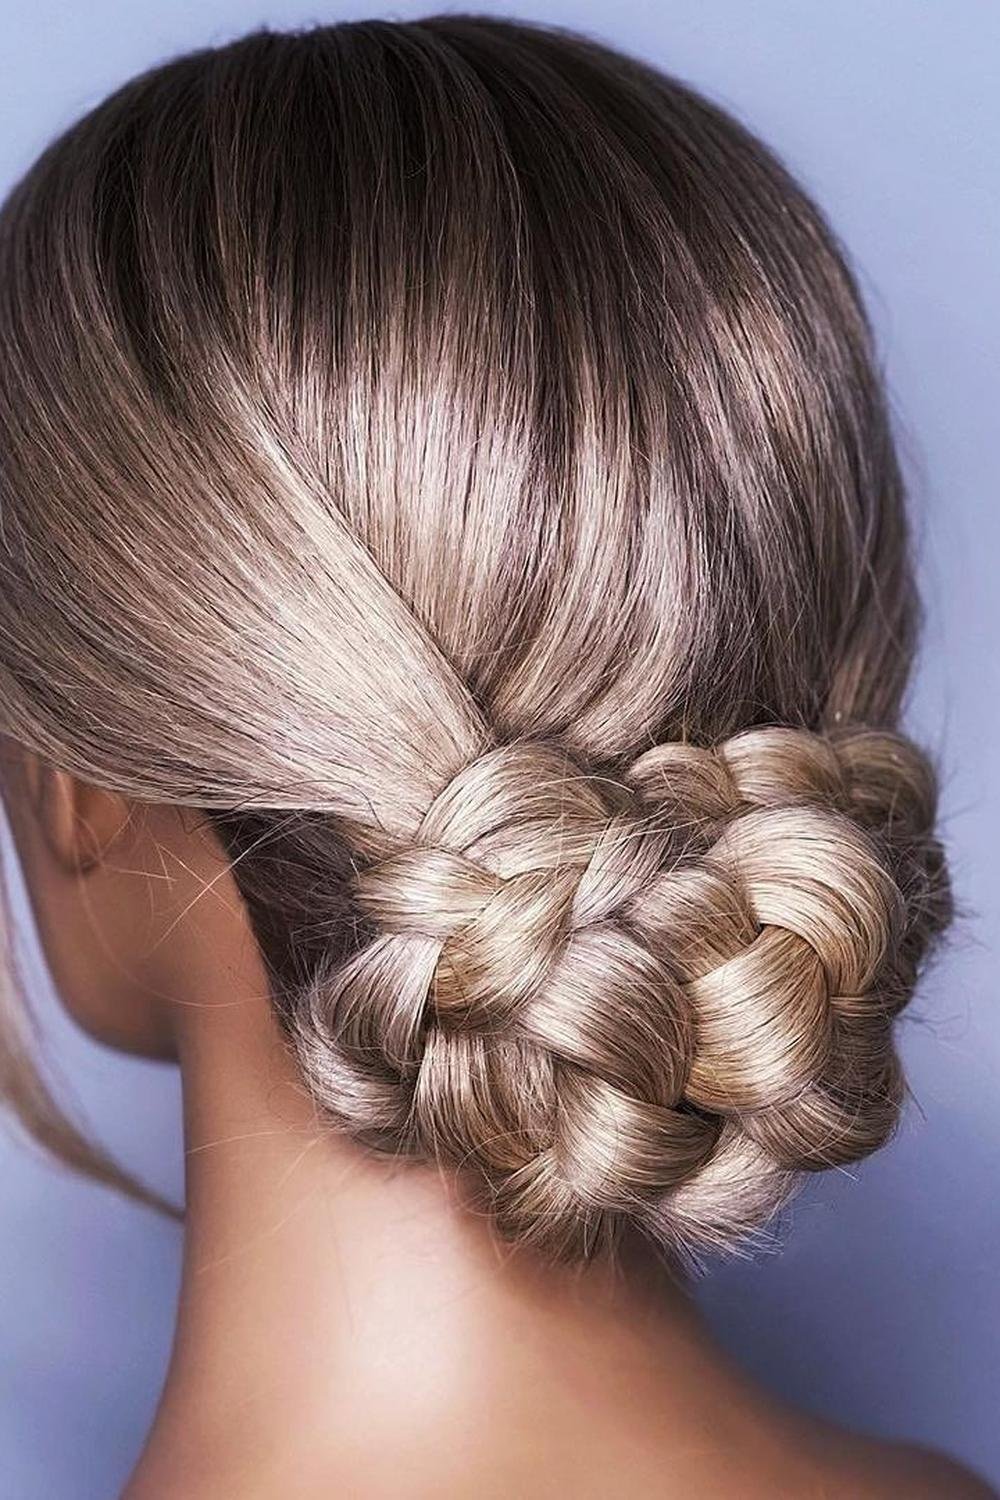 34 - Picture of Braided Hairstyles